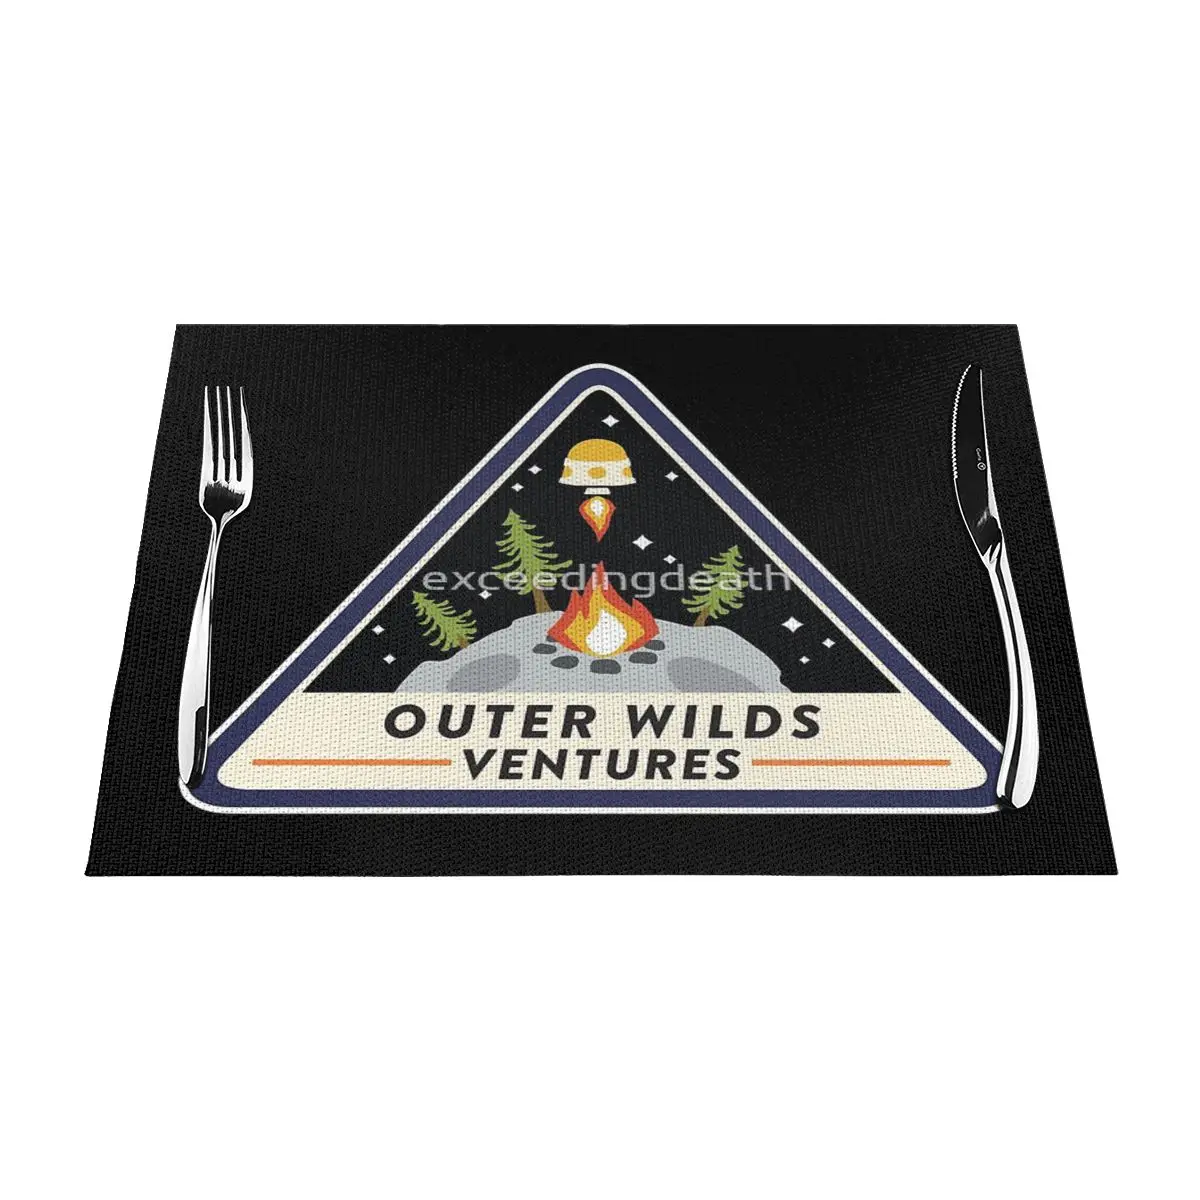 

Outer Wilds Ventures Placemat Vintage Wooden Farmhouse Table Perfect Accessory Easy to Clean